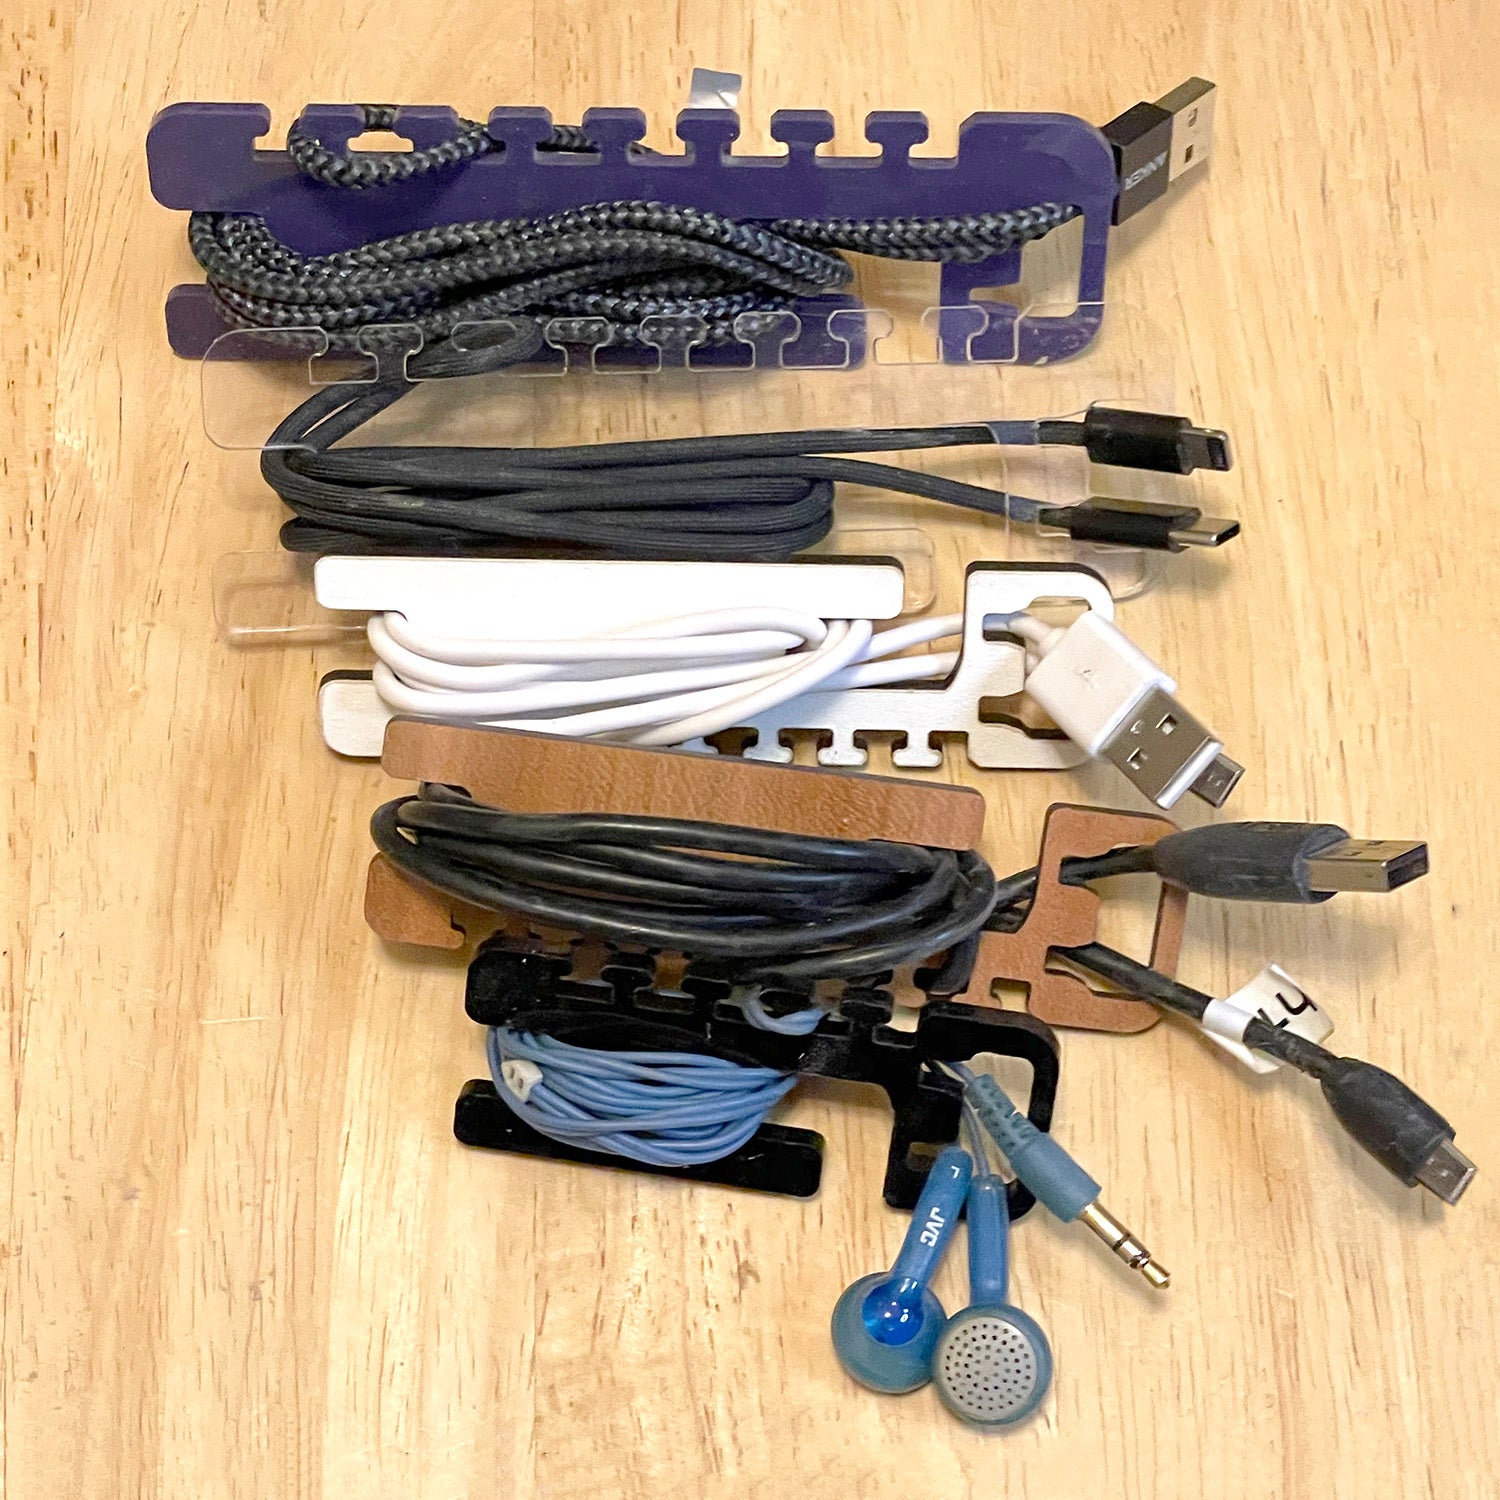 Quality Clever Cable Cover Organizer Kit